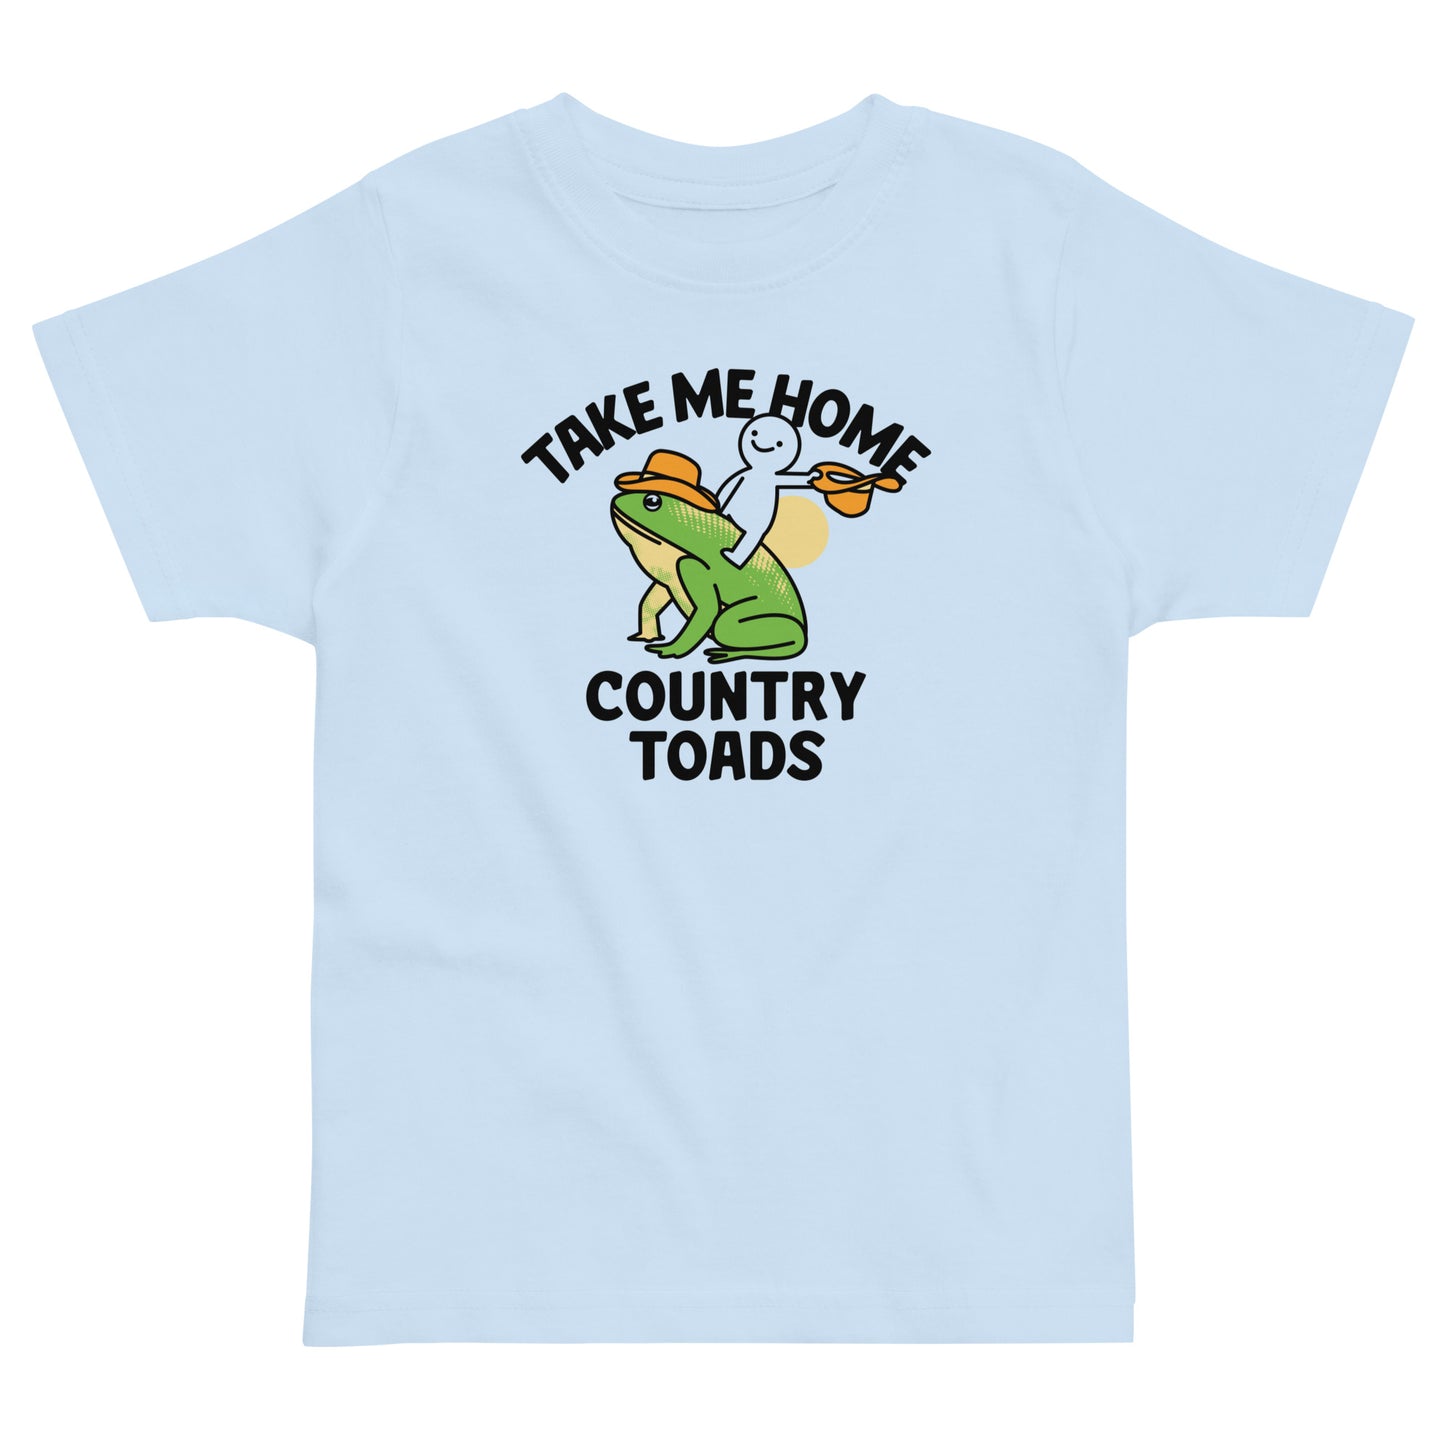 Take Me Home Country Toads Kid's Toddler Tee